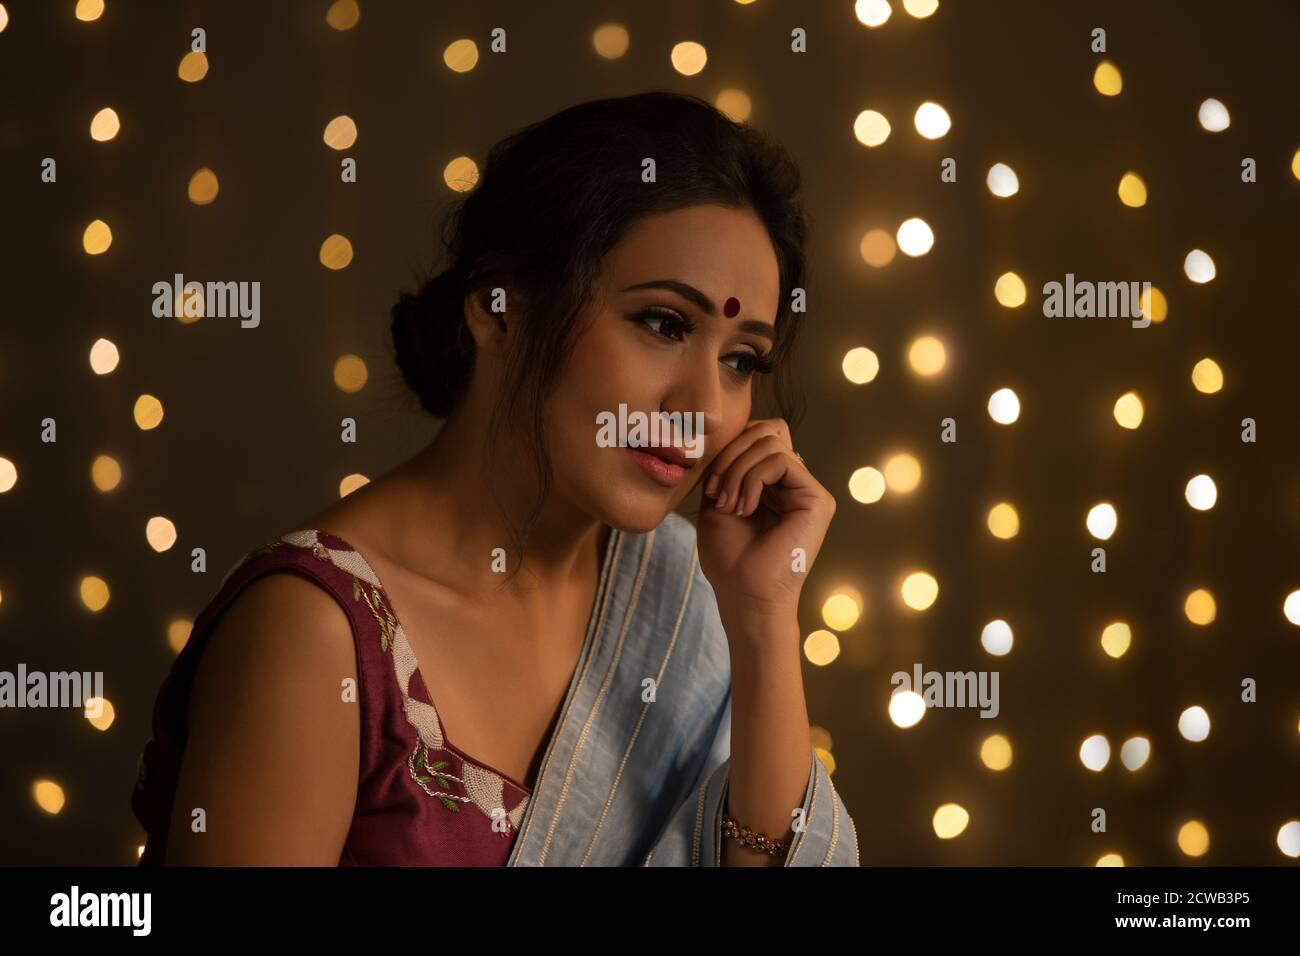 Beautiful woman in saree lost in thought Stock Photo